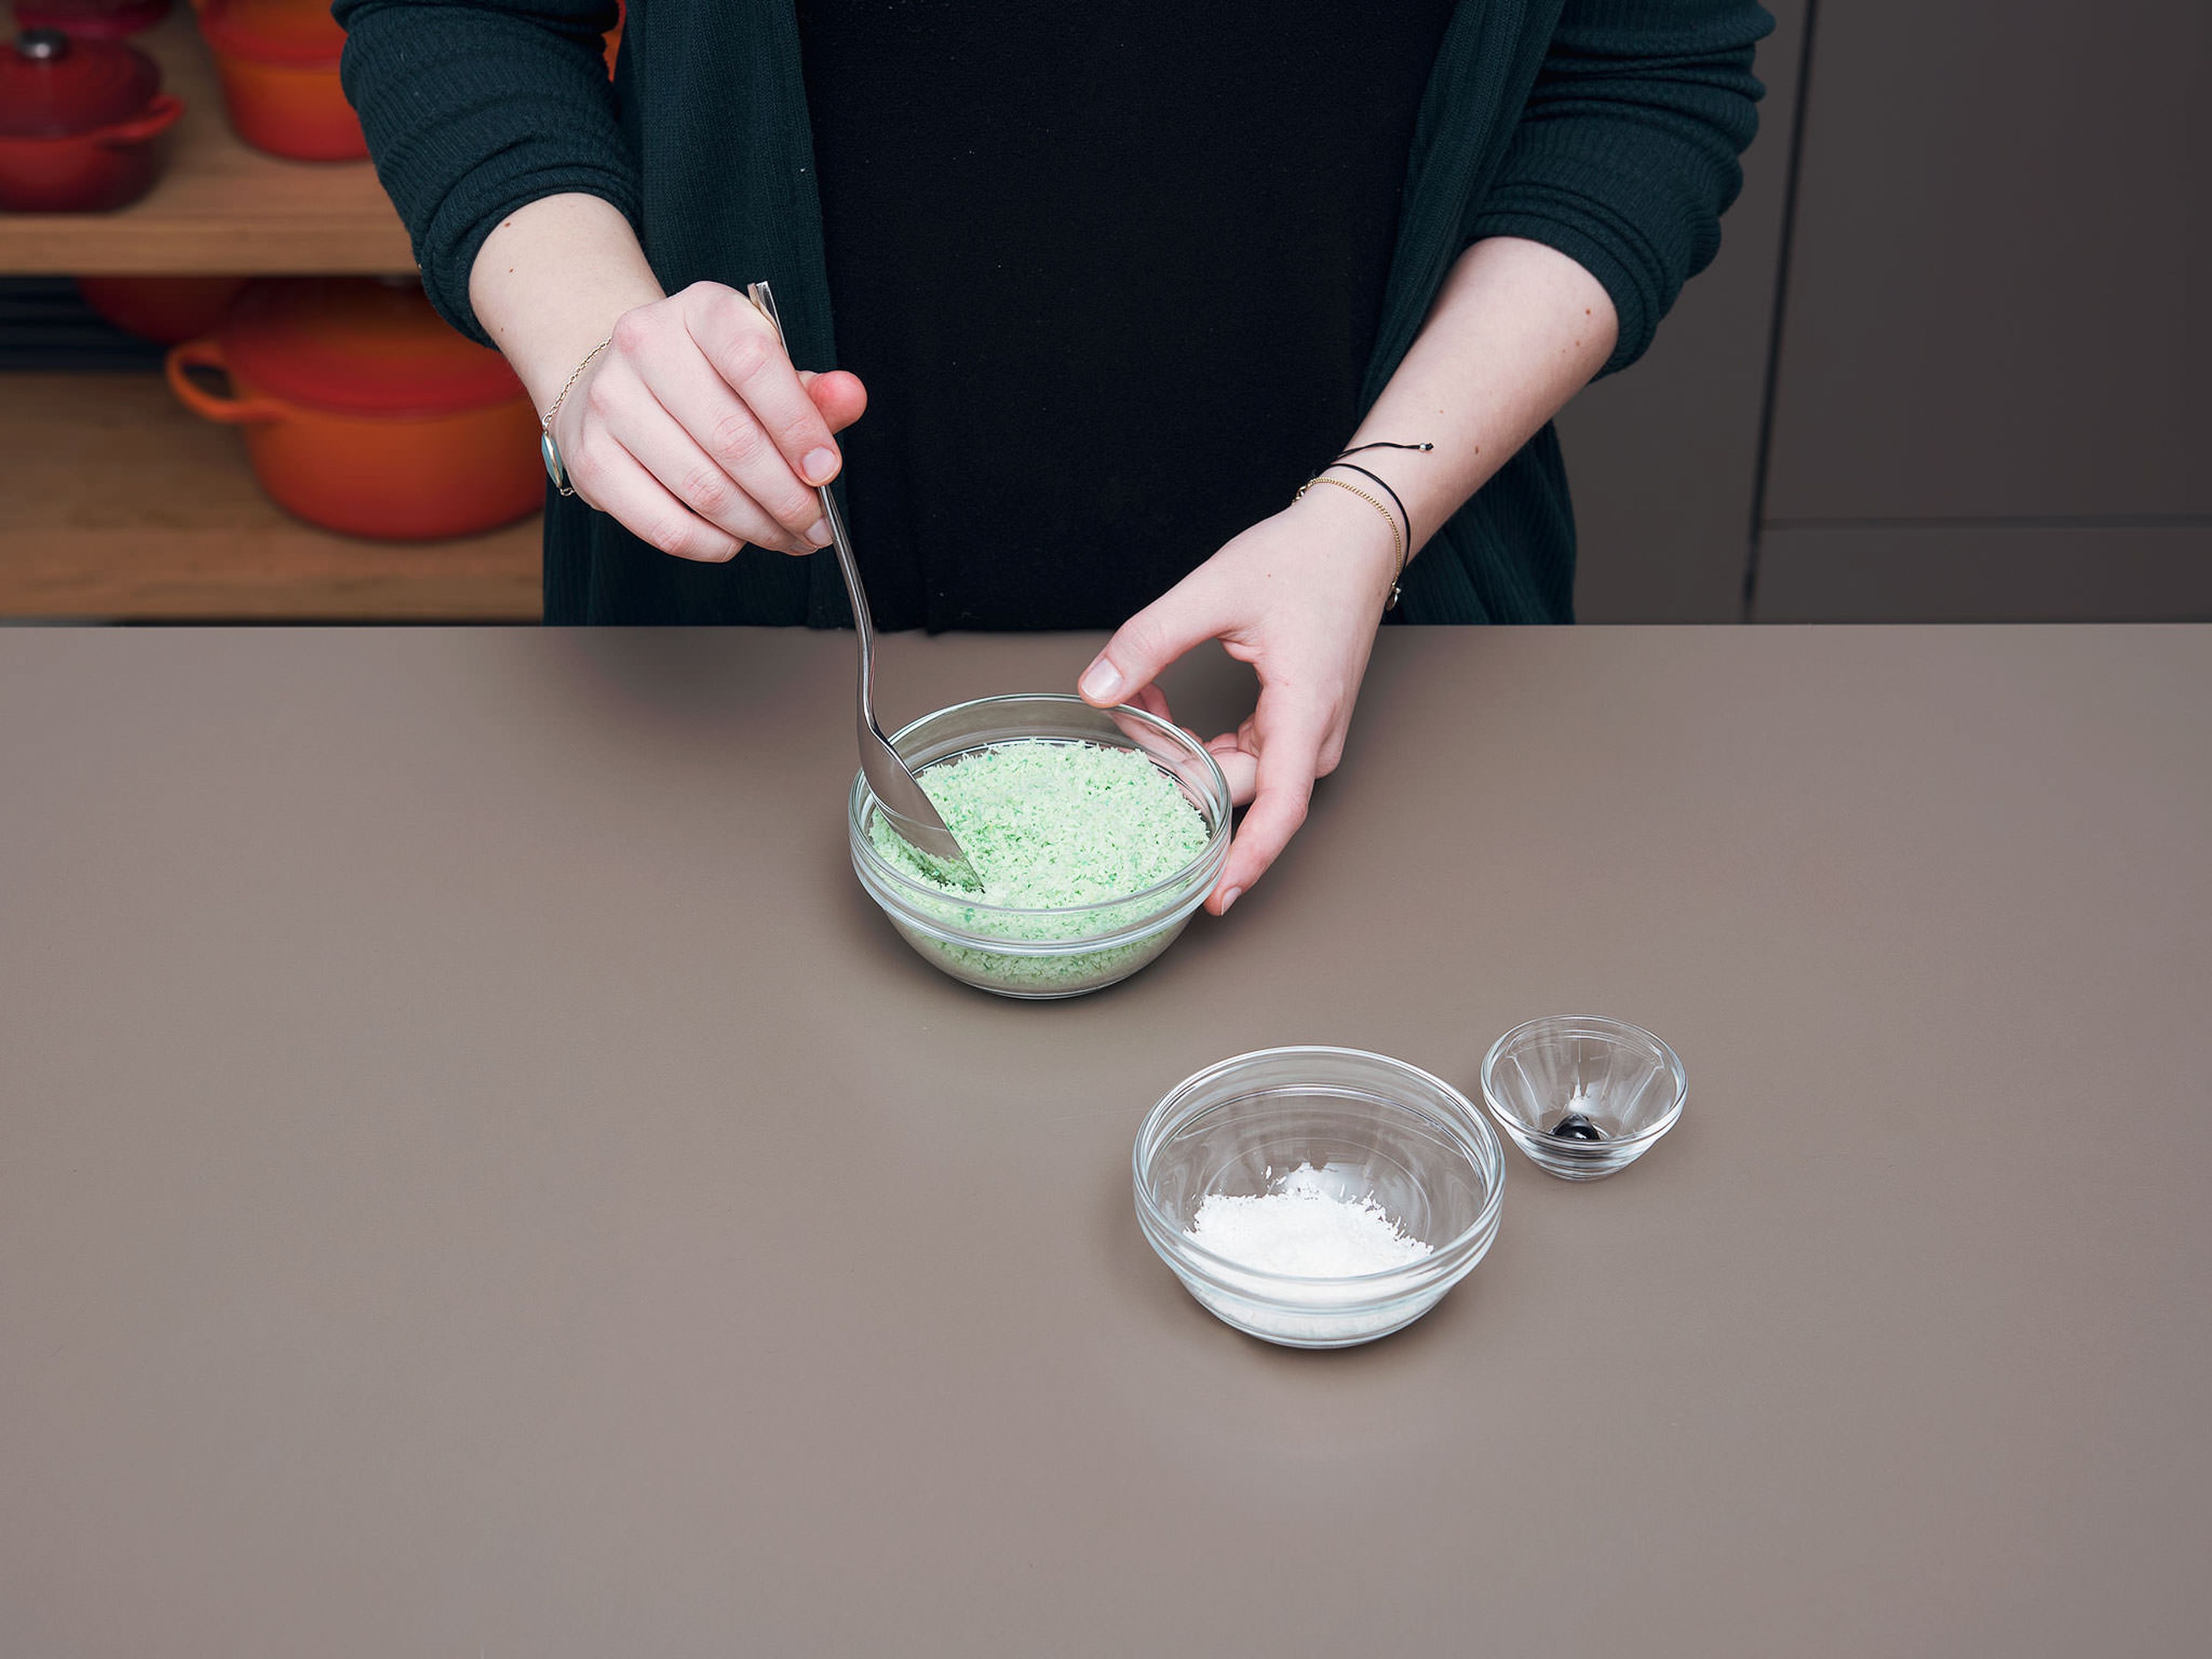 In a small bowl, mix together coconut flakes, green food coloring, and water to make lettuce. Set aside.